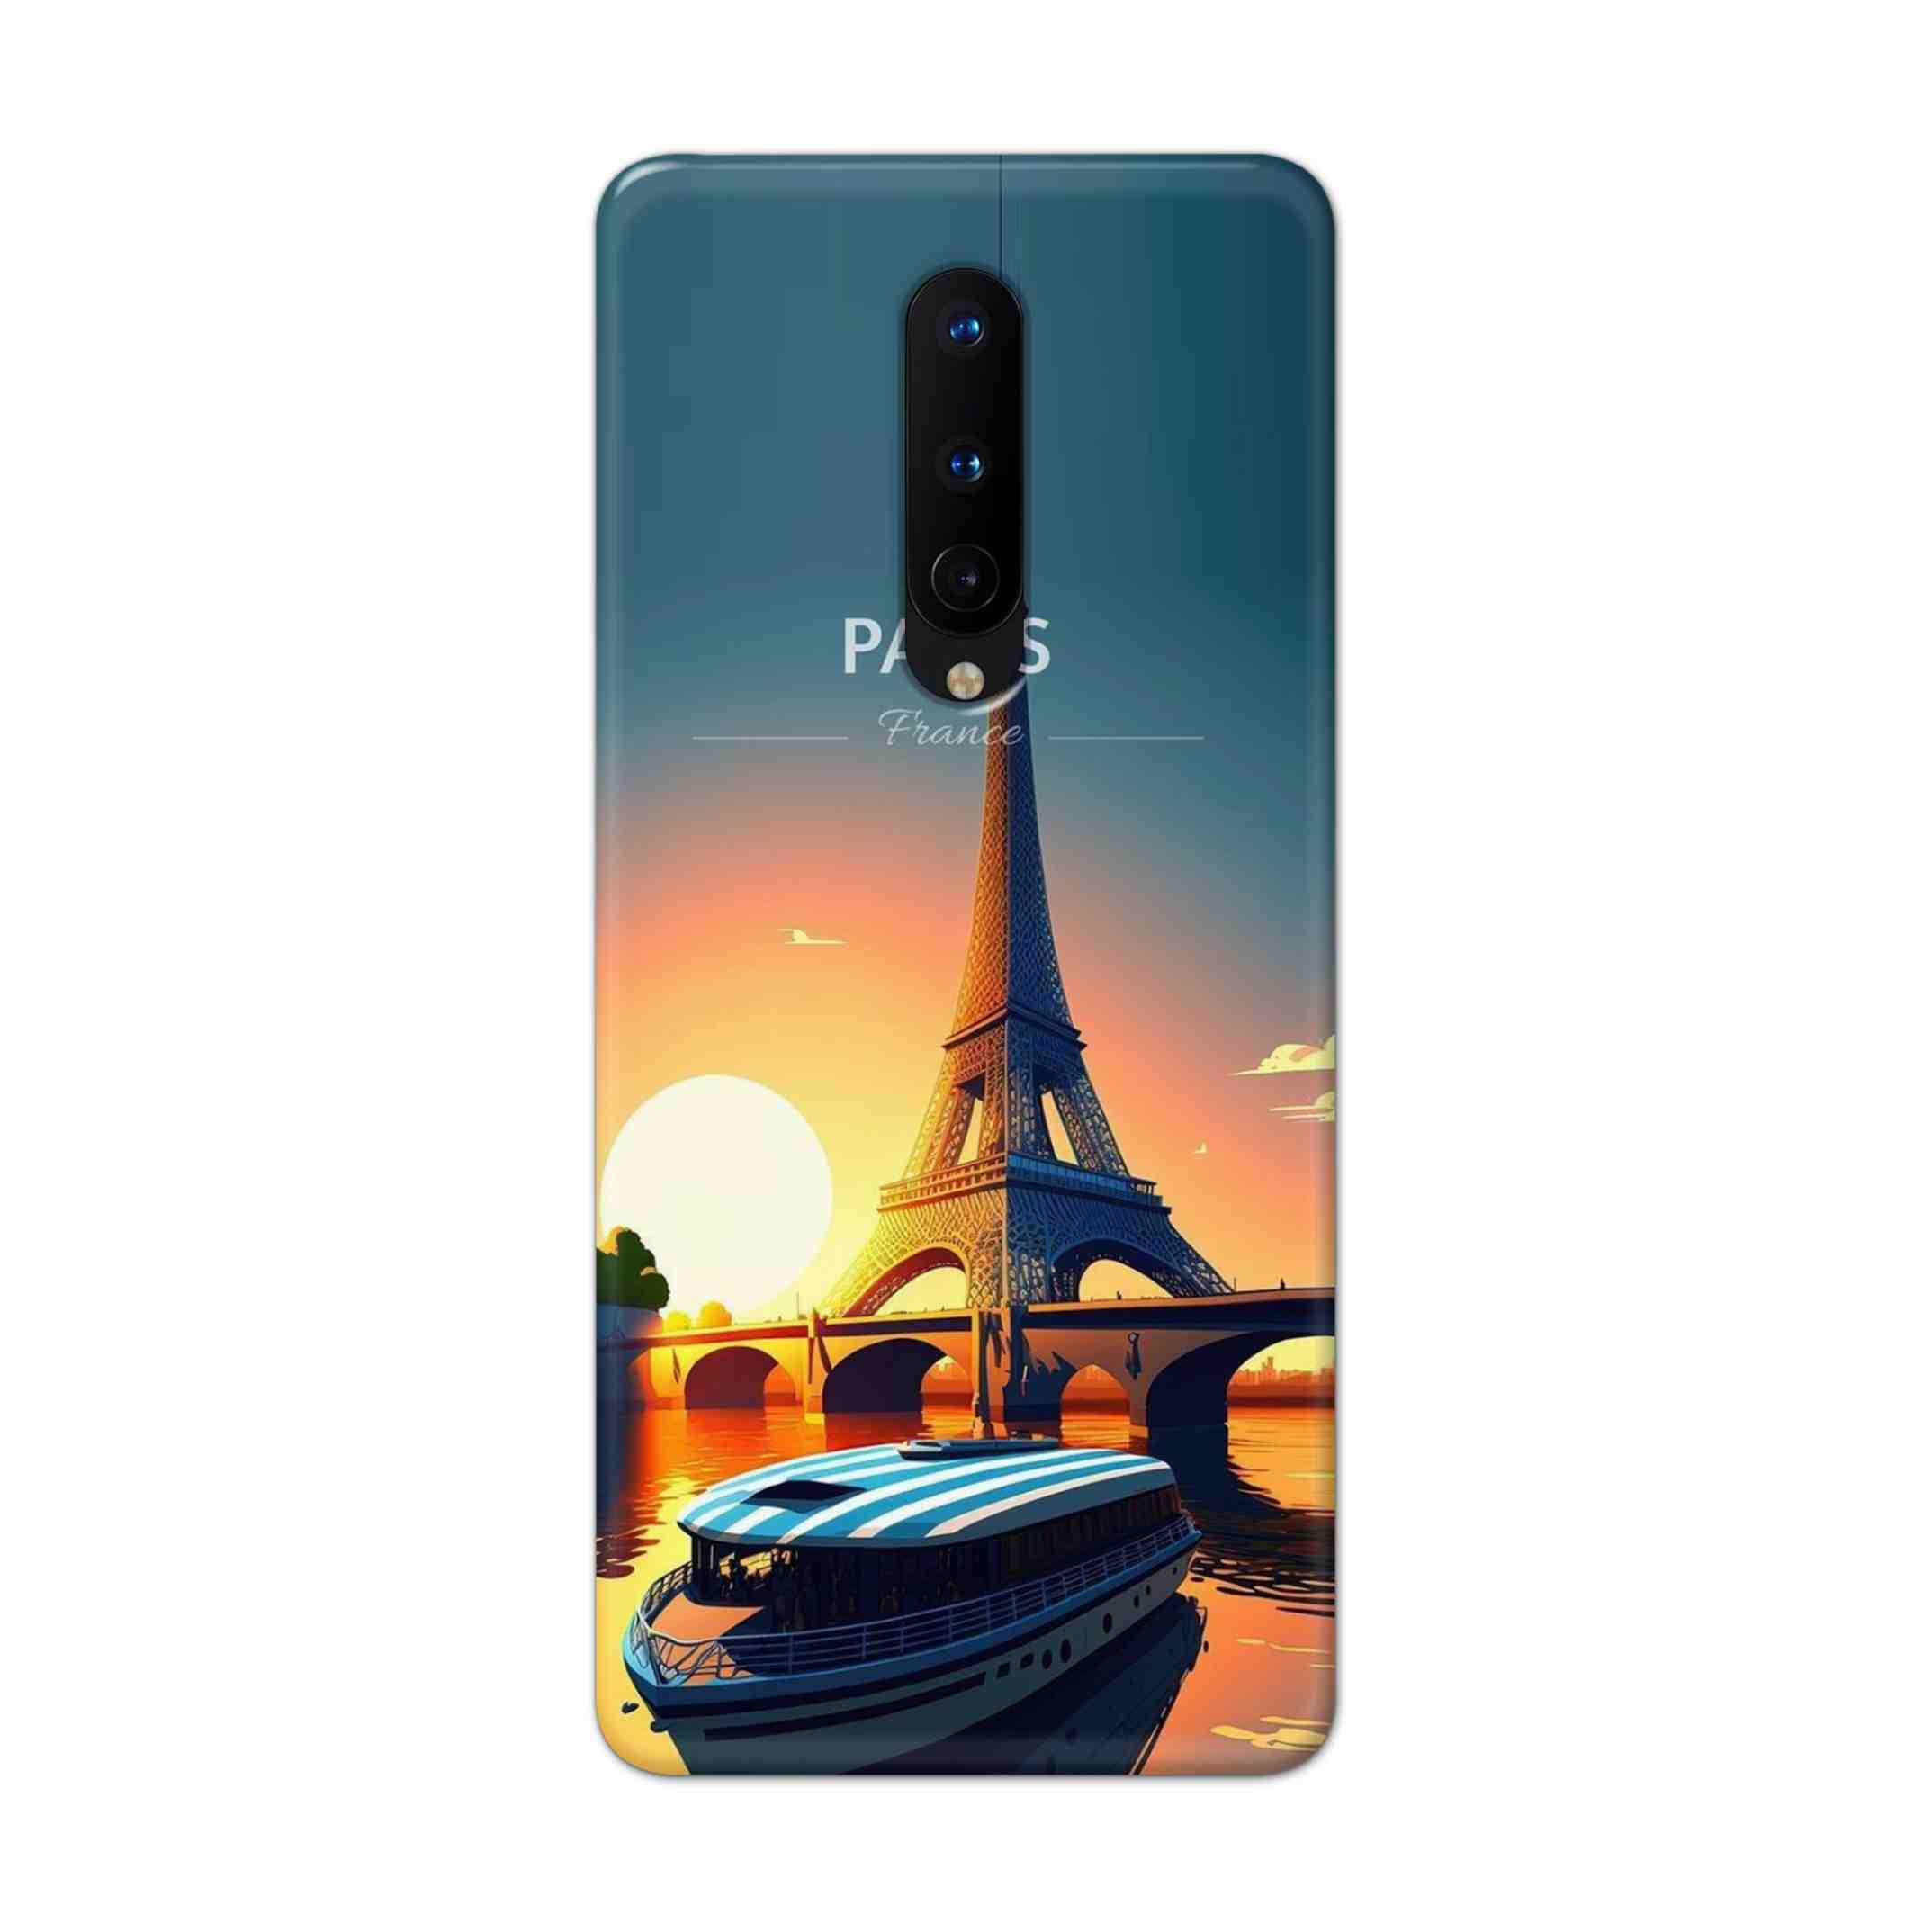 Buy France Hard Back Mobile Phone Case Cover For OnePlus 8 Online